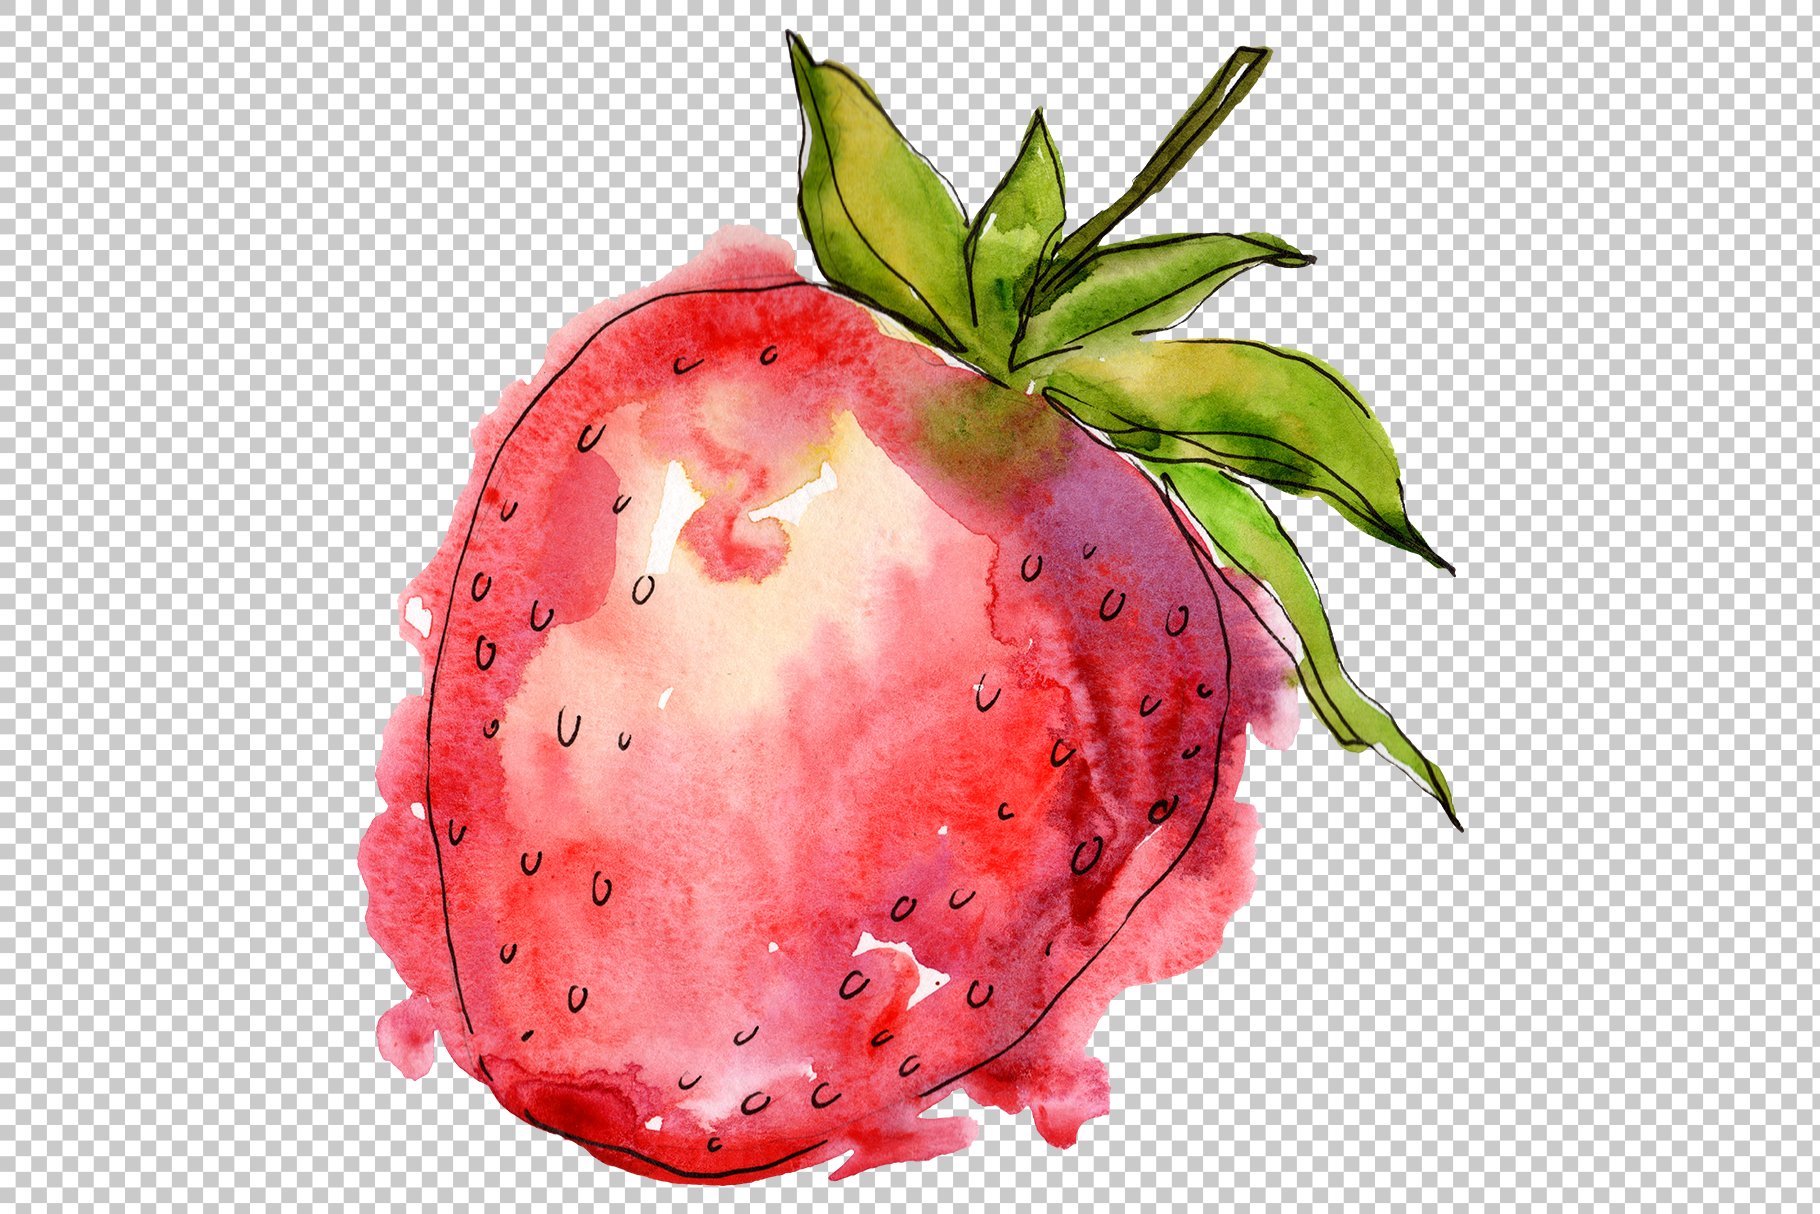 Hand painted strawberry on a transparent background.